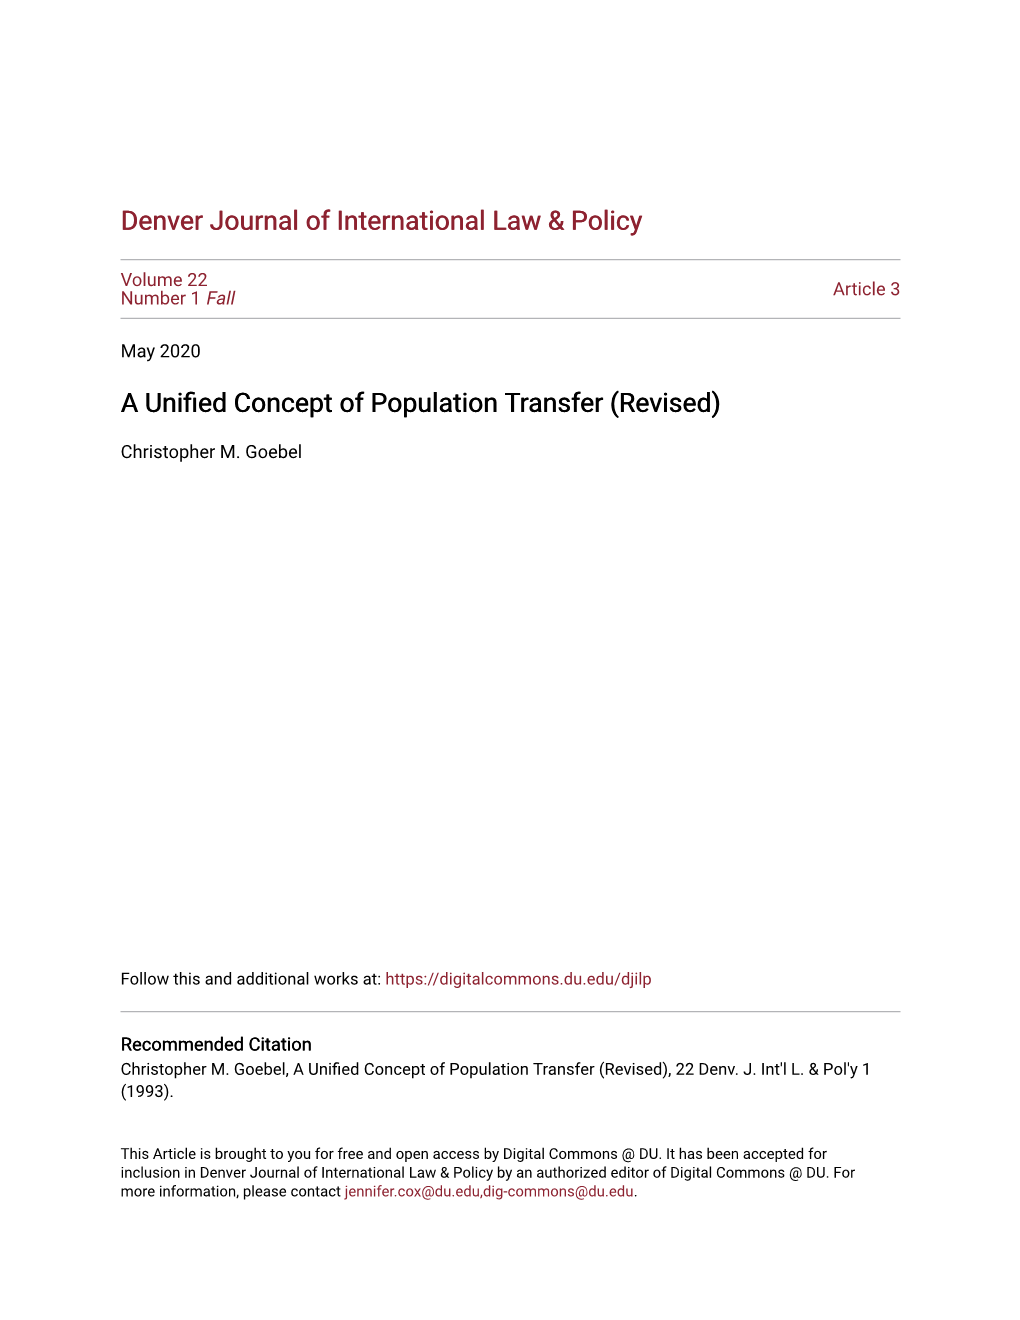 A Unified Concept of Population Transfer (Revised*) CHRISTOPHER M